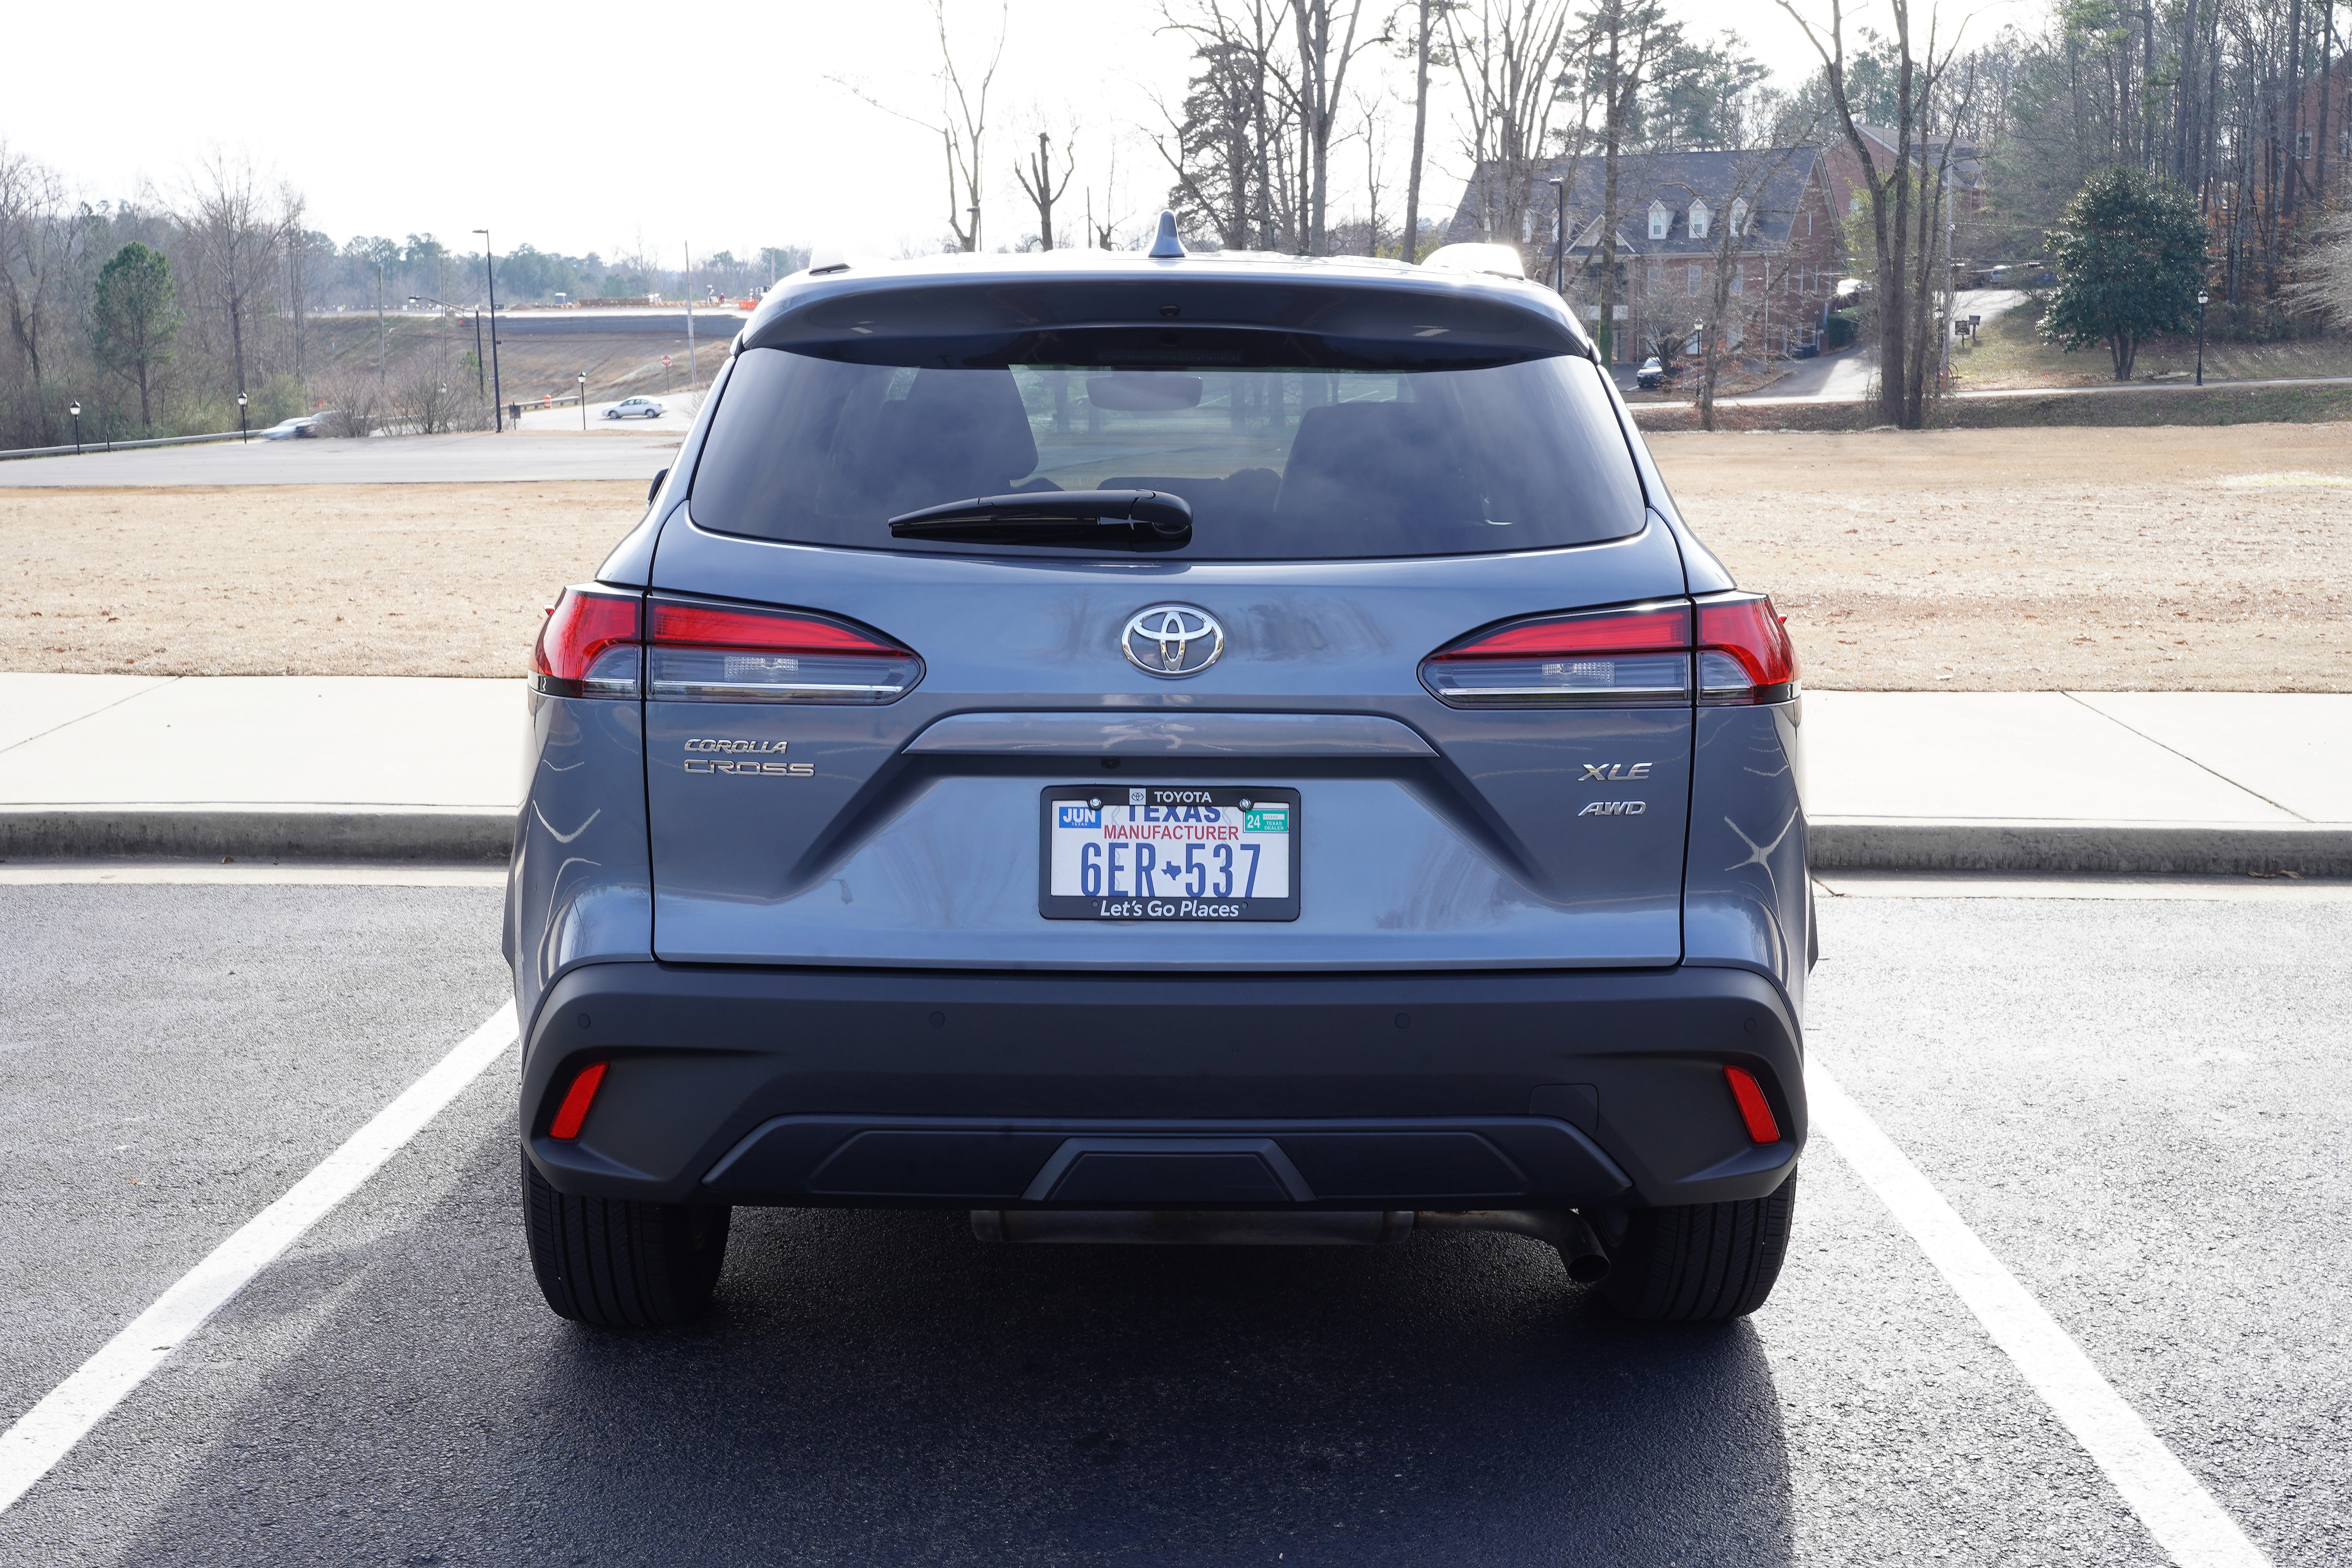 The back of the 2022 Toyota Corolla Cross